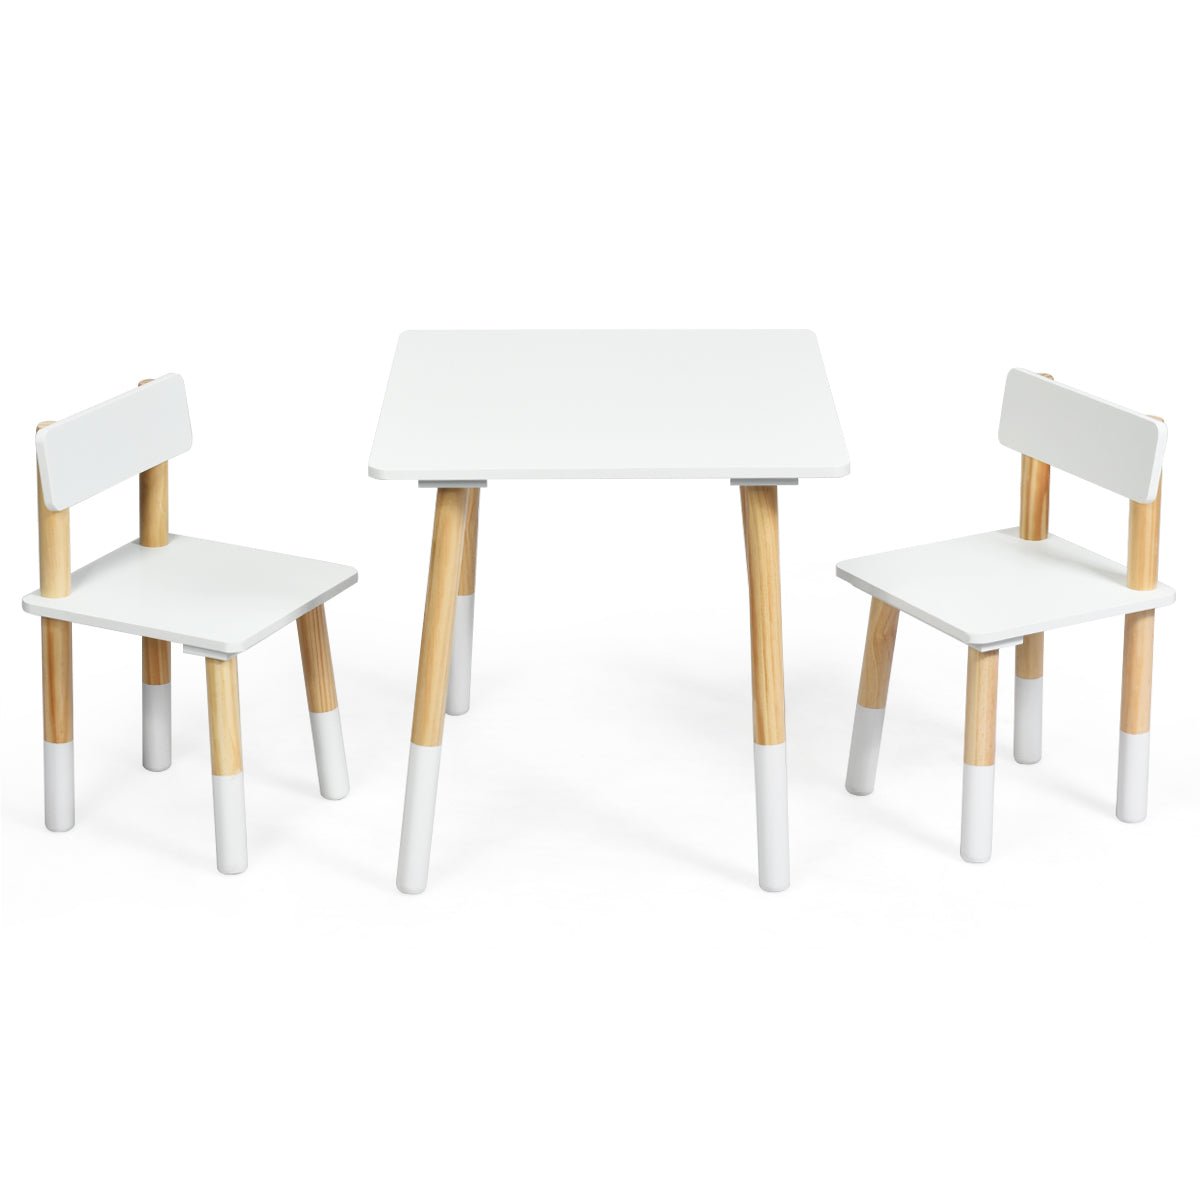 Kids Table & 2 Chairs Set: Pine Wood Legs for Play, Learn & Eat